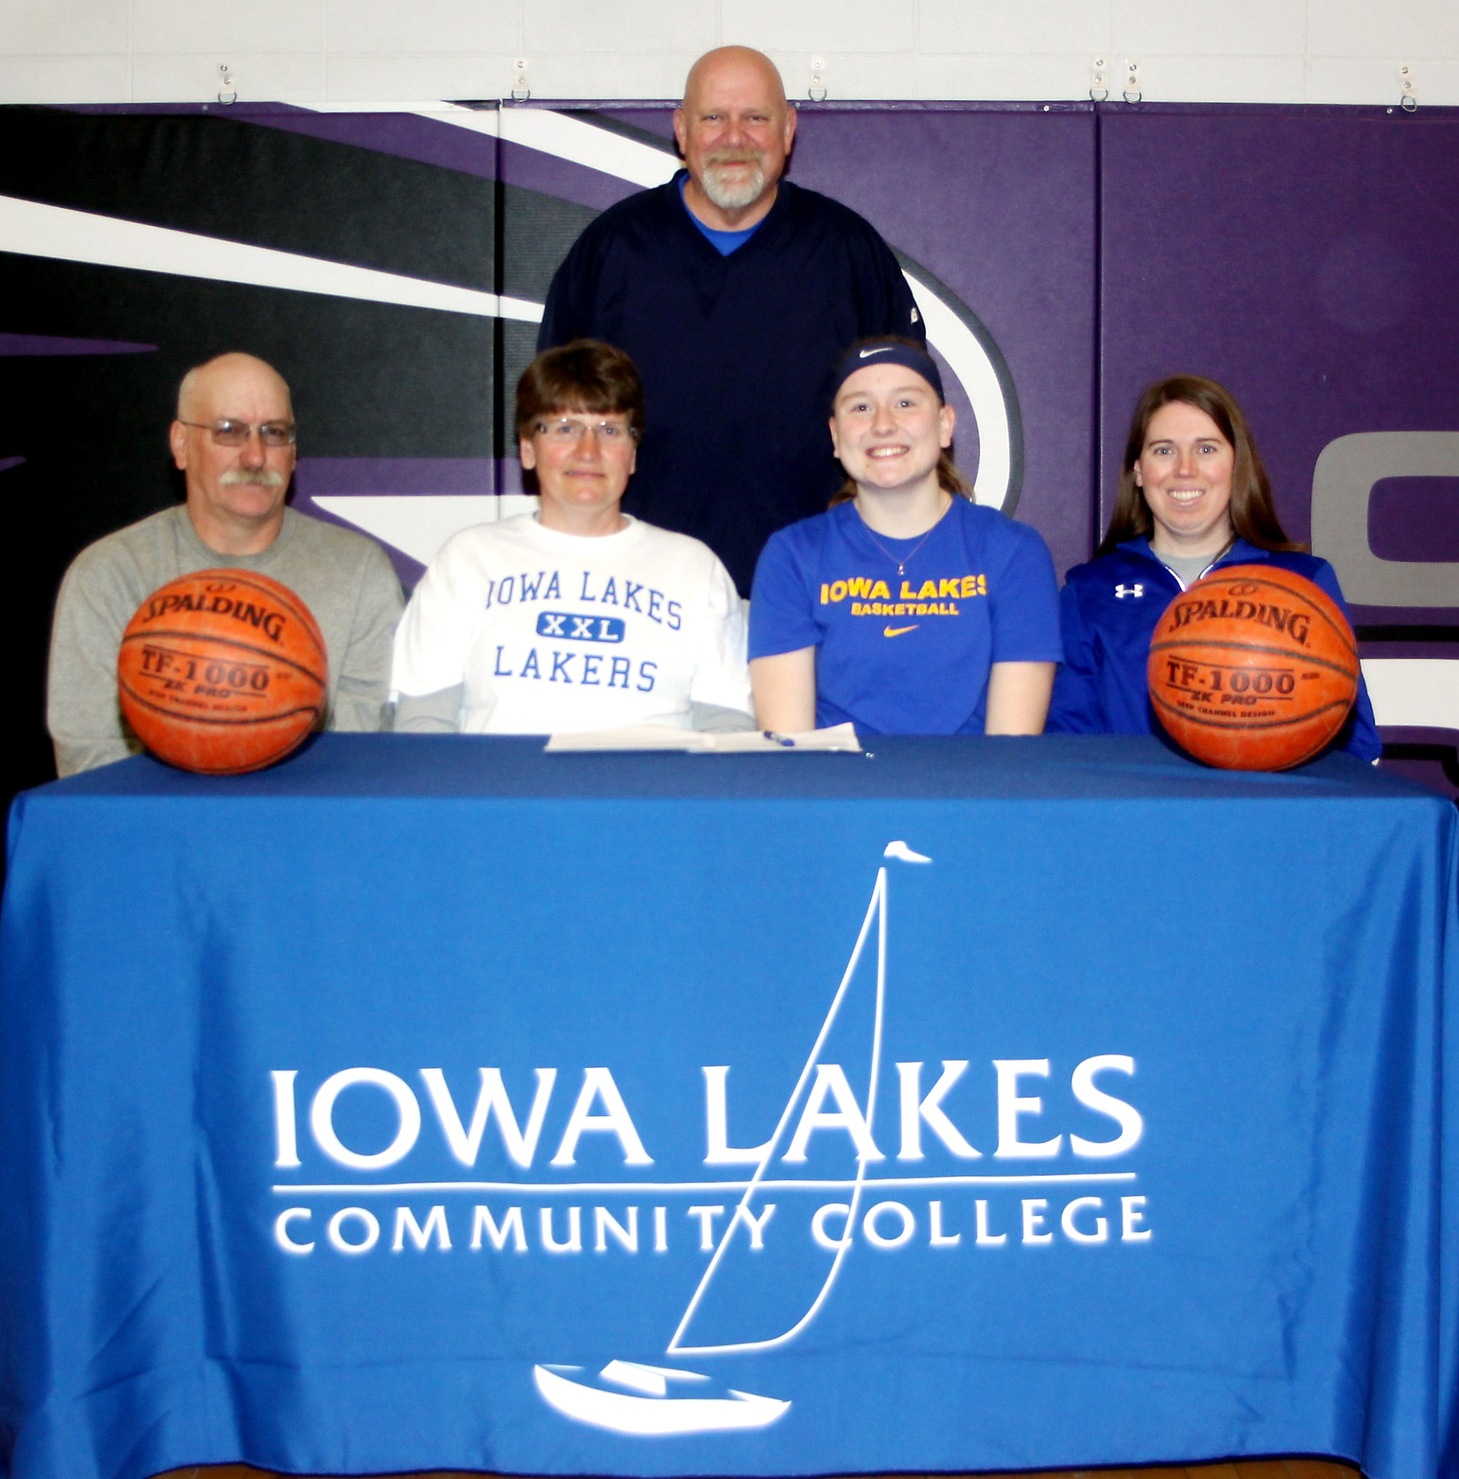 Beth Rehse to play at Iowa Lakes